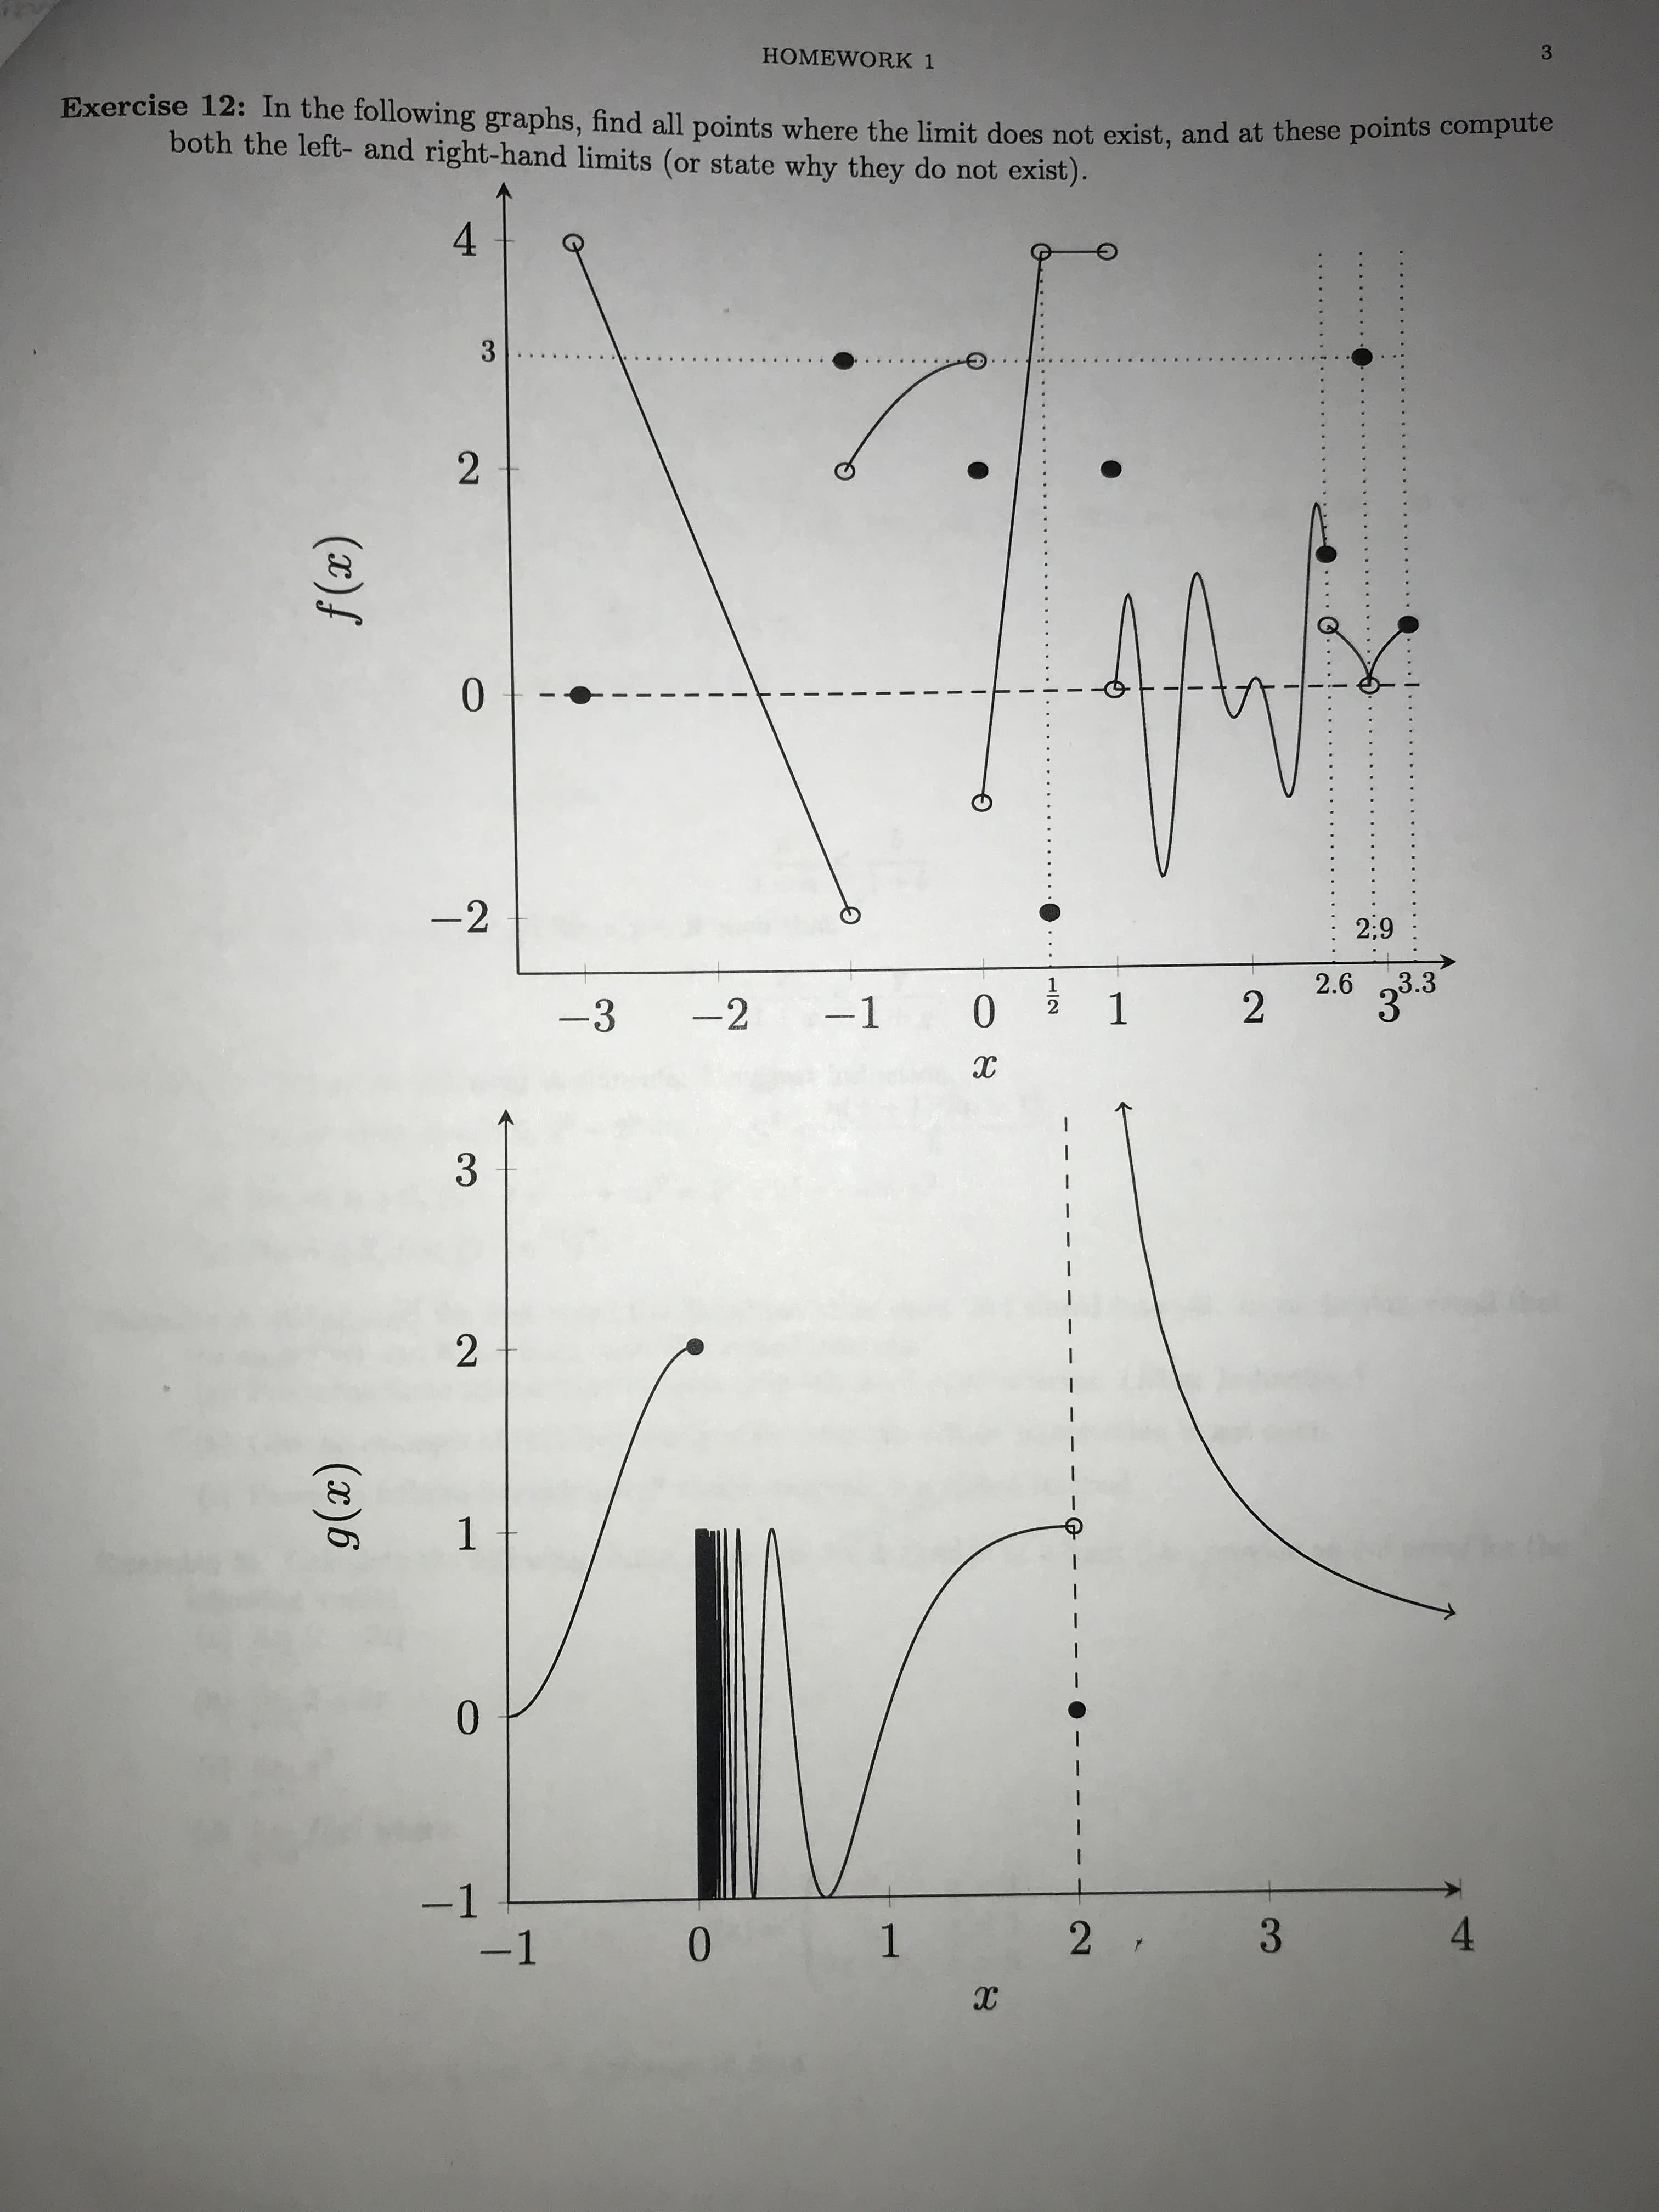 C3
HOMEWORK 1
Exercise 12: In the following graphs, find all points where the limit does not exist, and at these points compute
both the left- and right-hand limits (or state why they do not exist).
4
3
2
0
-2
2:9
2.6
2
1
2
33.3
1
0
-1
-3
-2
3
2
1
0
-1
-1
2 ,
4
3
0
1
X
(r)f
(r)6
